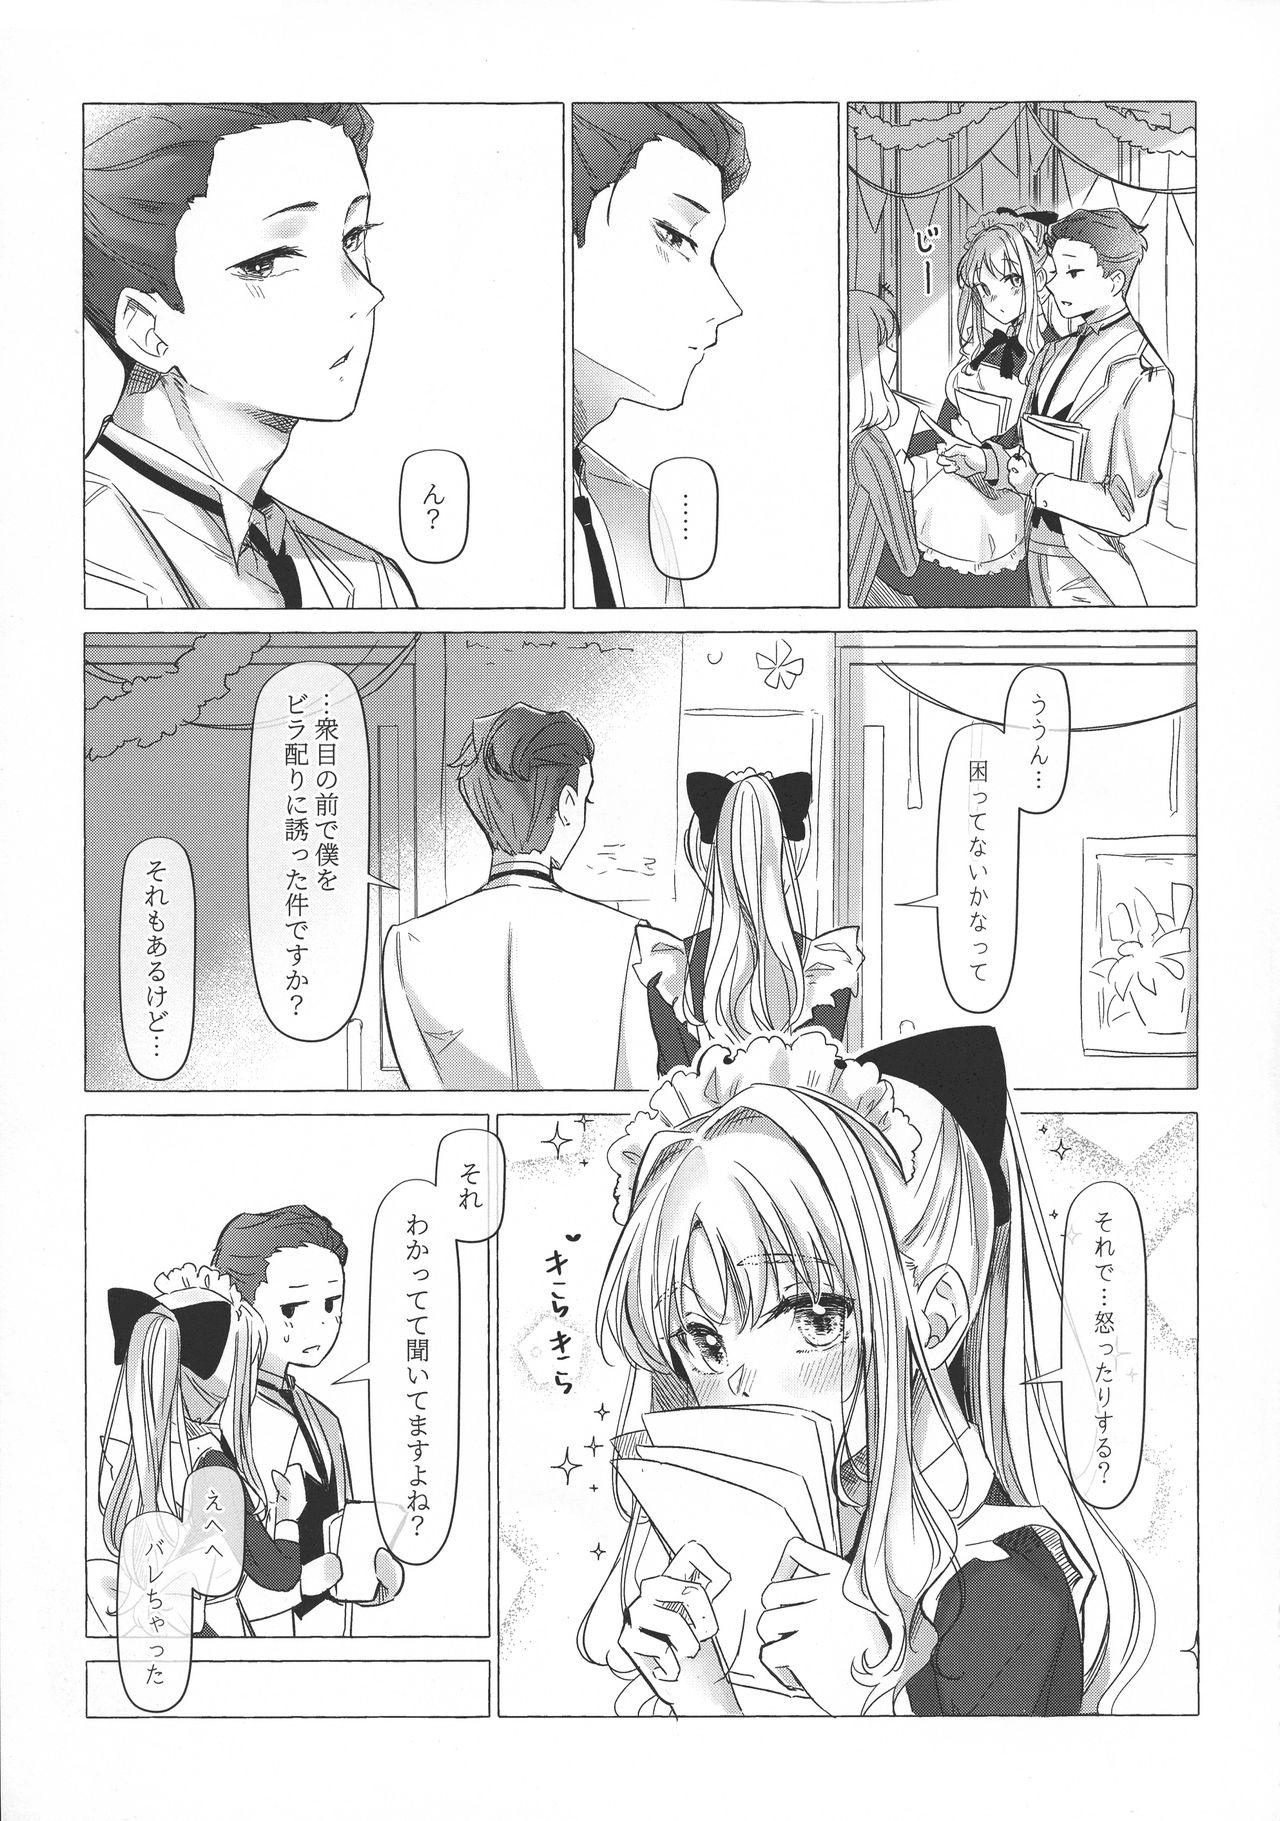 Com 満心総意の躾 - Darling in the franxx Pick Up - Page 6